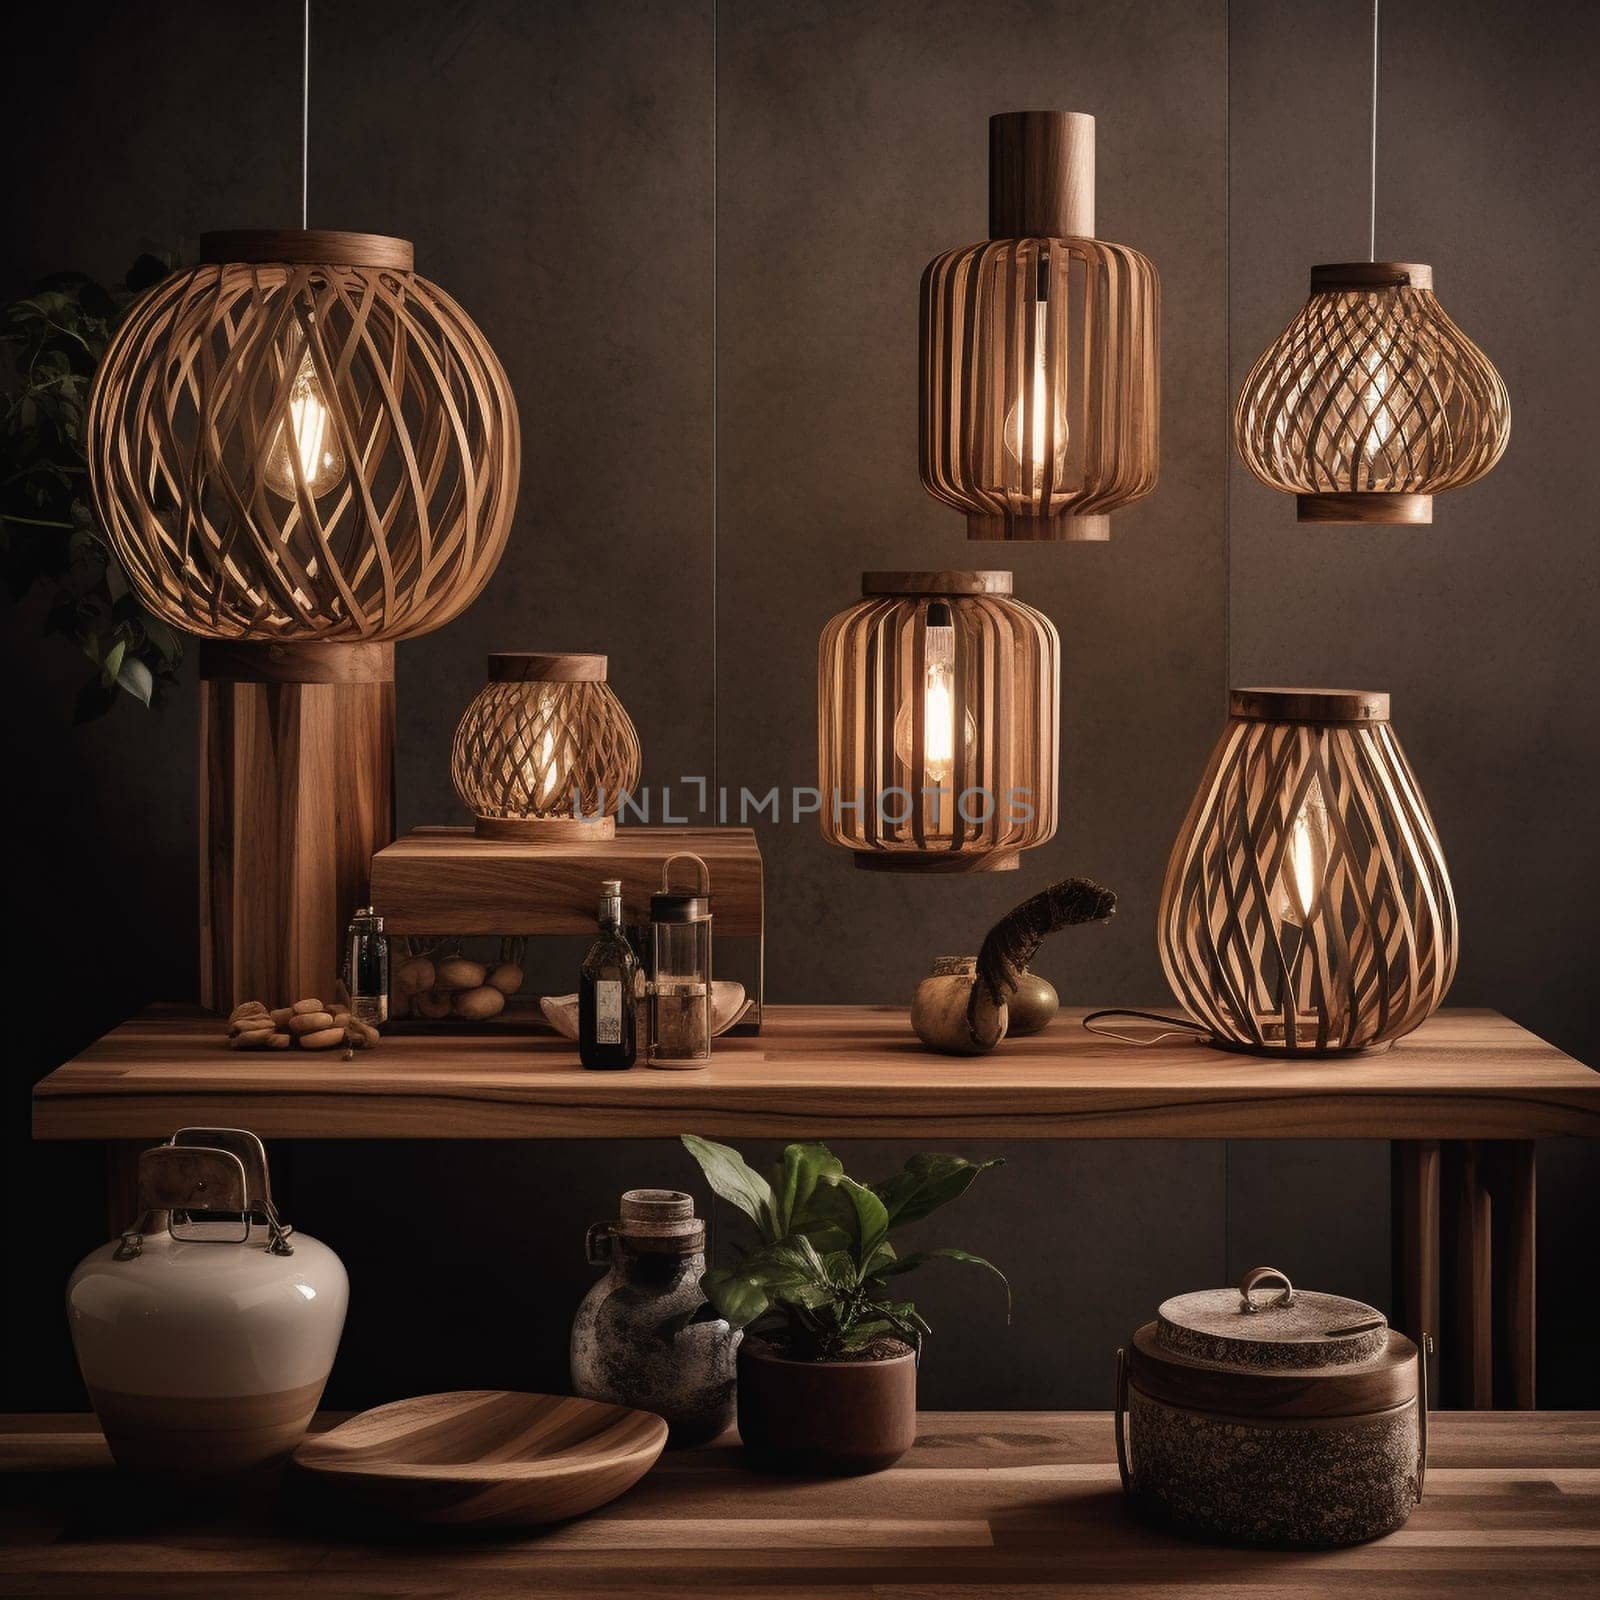 The Beauty and Elegance of Wooden Lamps and Lighting Fixtures by Sahin